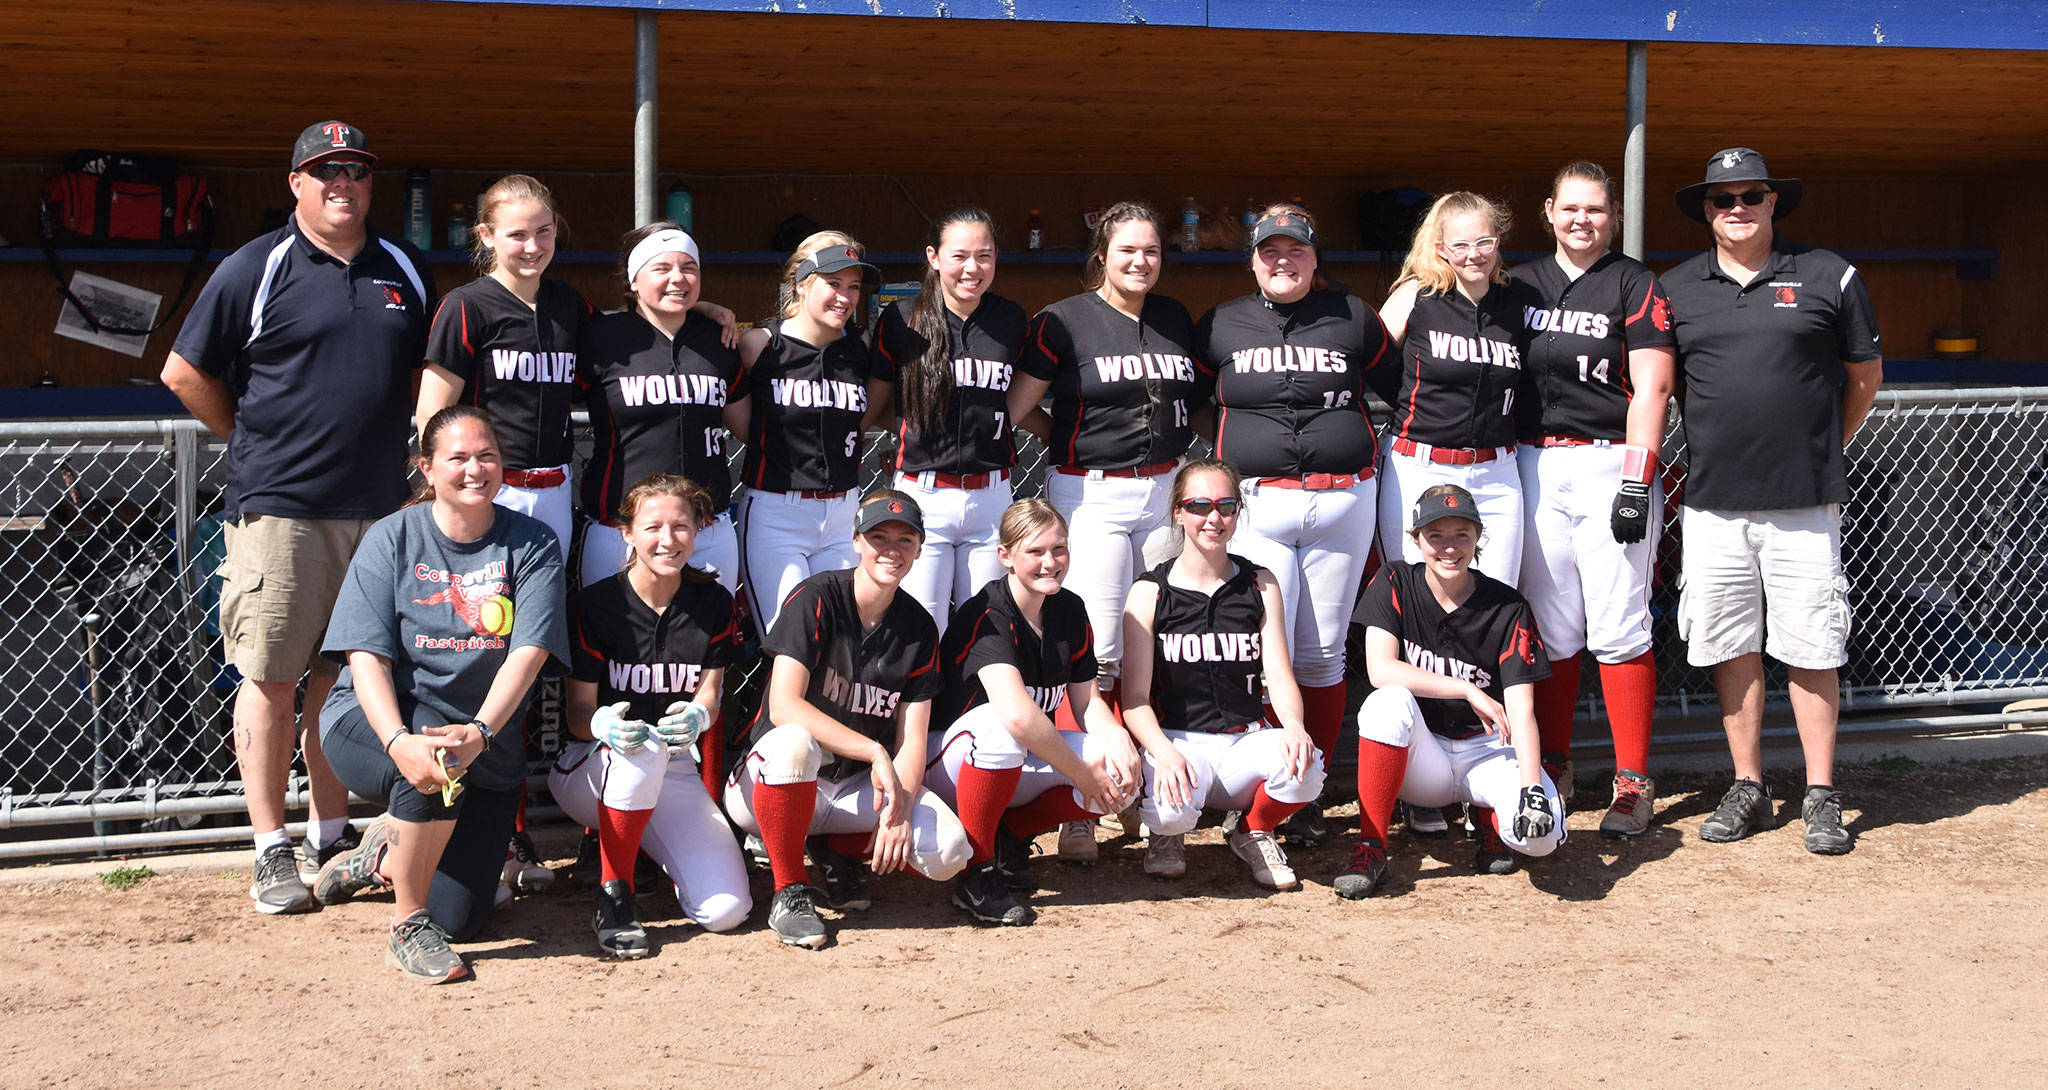 The state-bound Coupeville softball team — Back row, left to right: coach Kevin McGranahan,, Isabelle Wells, Mollie Bailey, Emma Mathusek, Scout Smith, Sarah Wright, Nicole Laxton, Marenna Rebischke-Smith,Veronica Crownover and coach Ron Wright. Front row: coach Justine McGranahan, Chloe Wheeler, Chelsea Prescott, Audrianna Shaw, Coral Caveness and Mackenzie Davis.